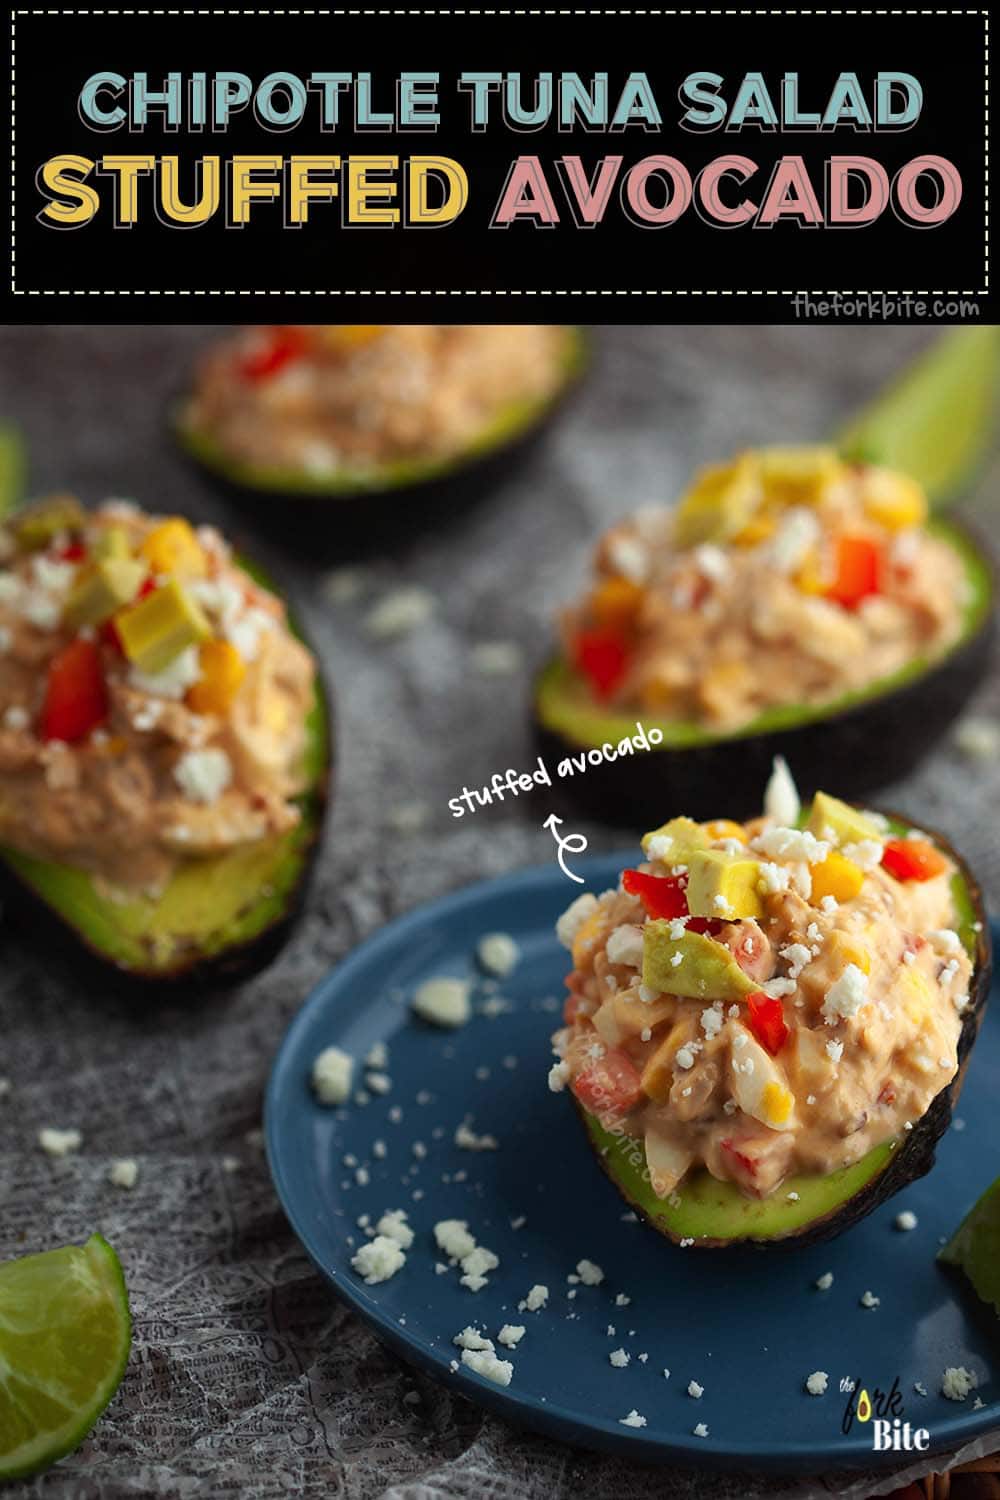 This super easy Chipotle tuna salad stuffed avocado is a unique lunch idea and is perfect for a low carb keto snack packed with bold flavors.